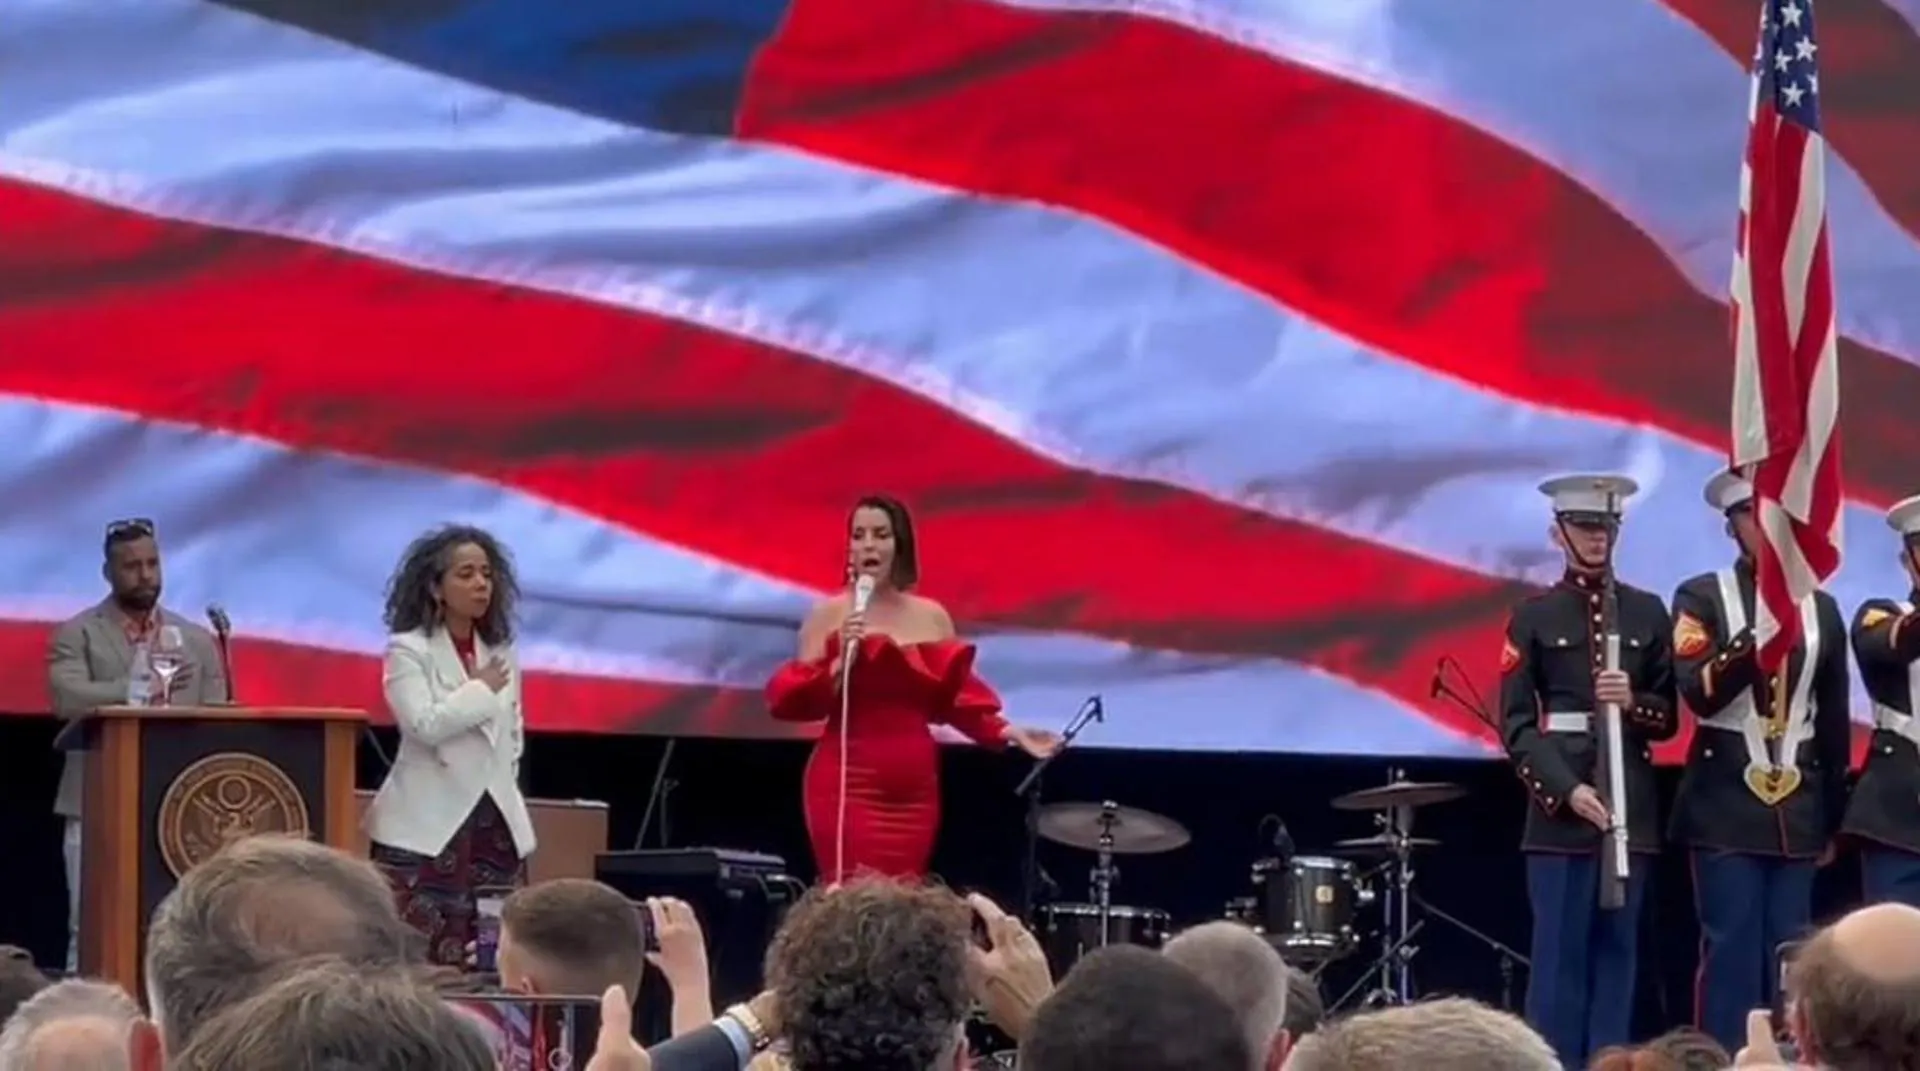 Ruth Lorenzo thrills in Las Ventas singing the American anthem at the party for the 4th of July